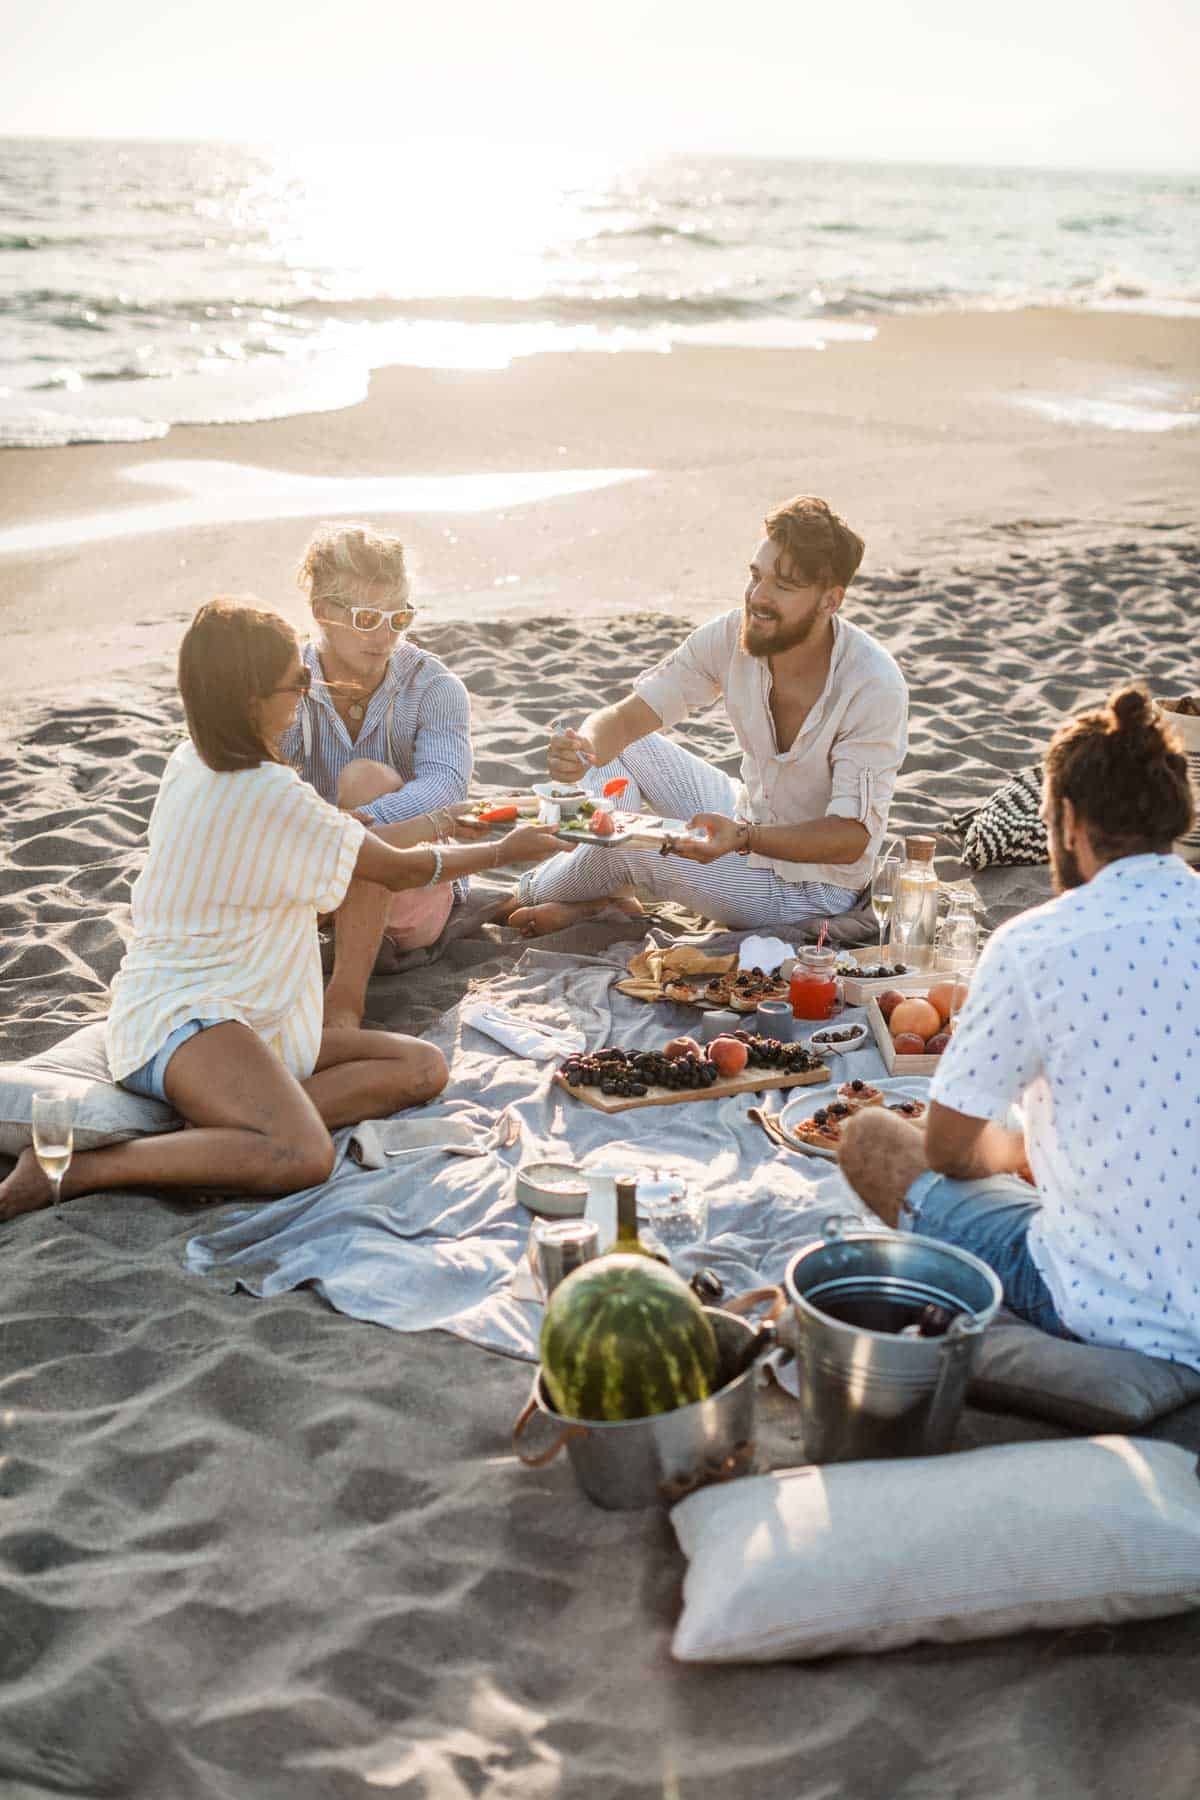 Friends enjoying a picnic on the beach at sunset. 